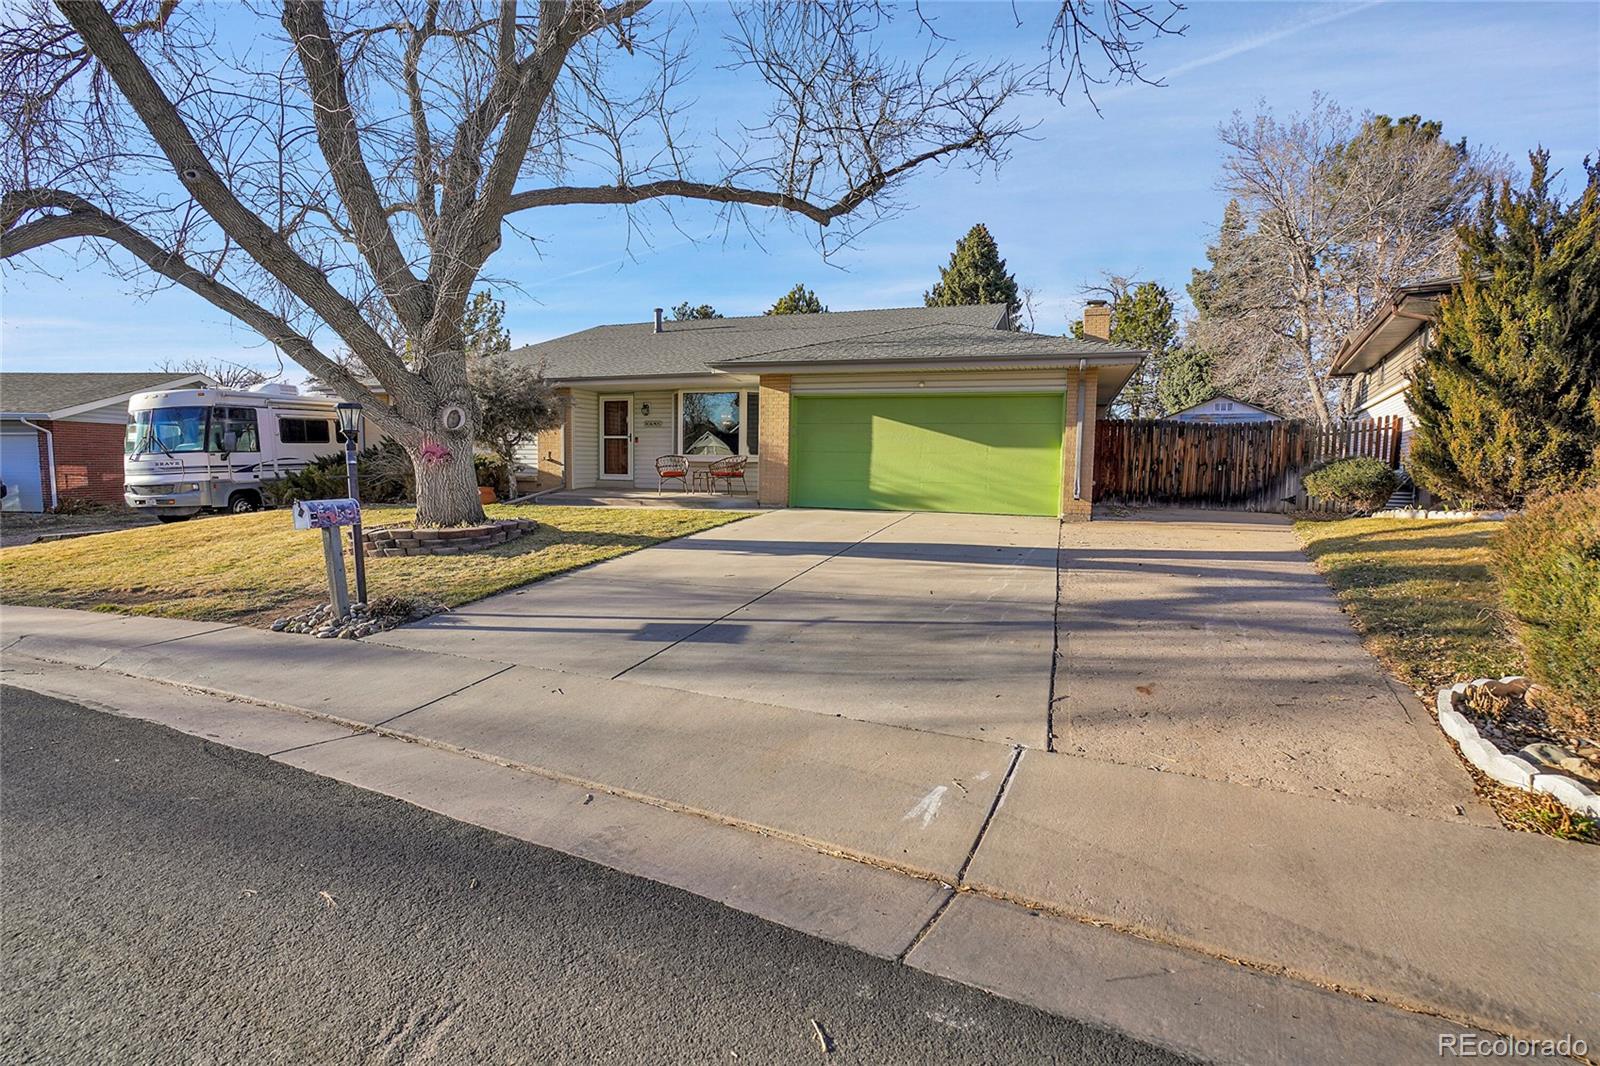 6645 s apache drive, littleton sold home. Closed on 2024-04-15 for $750,000.